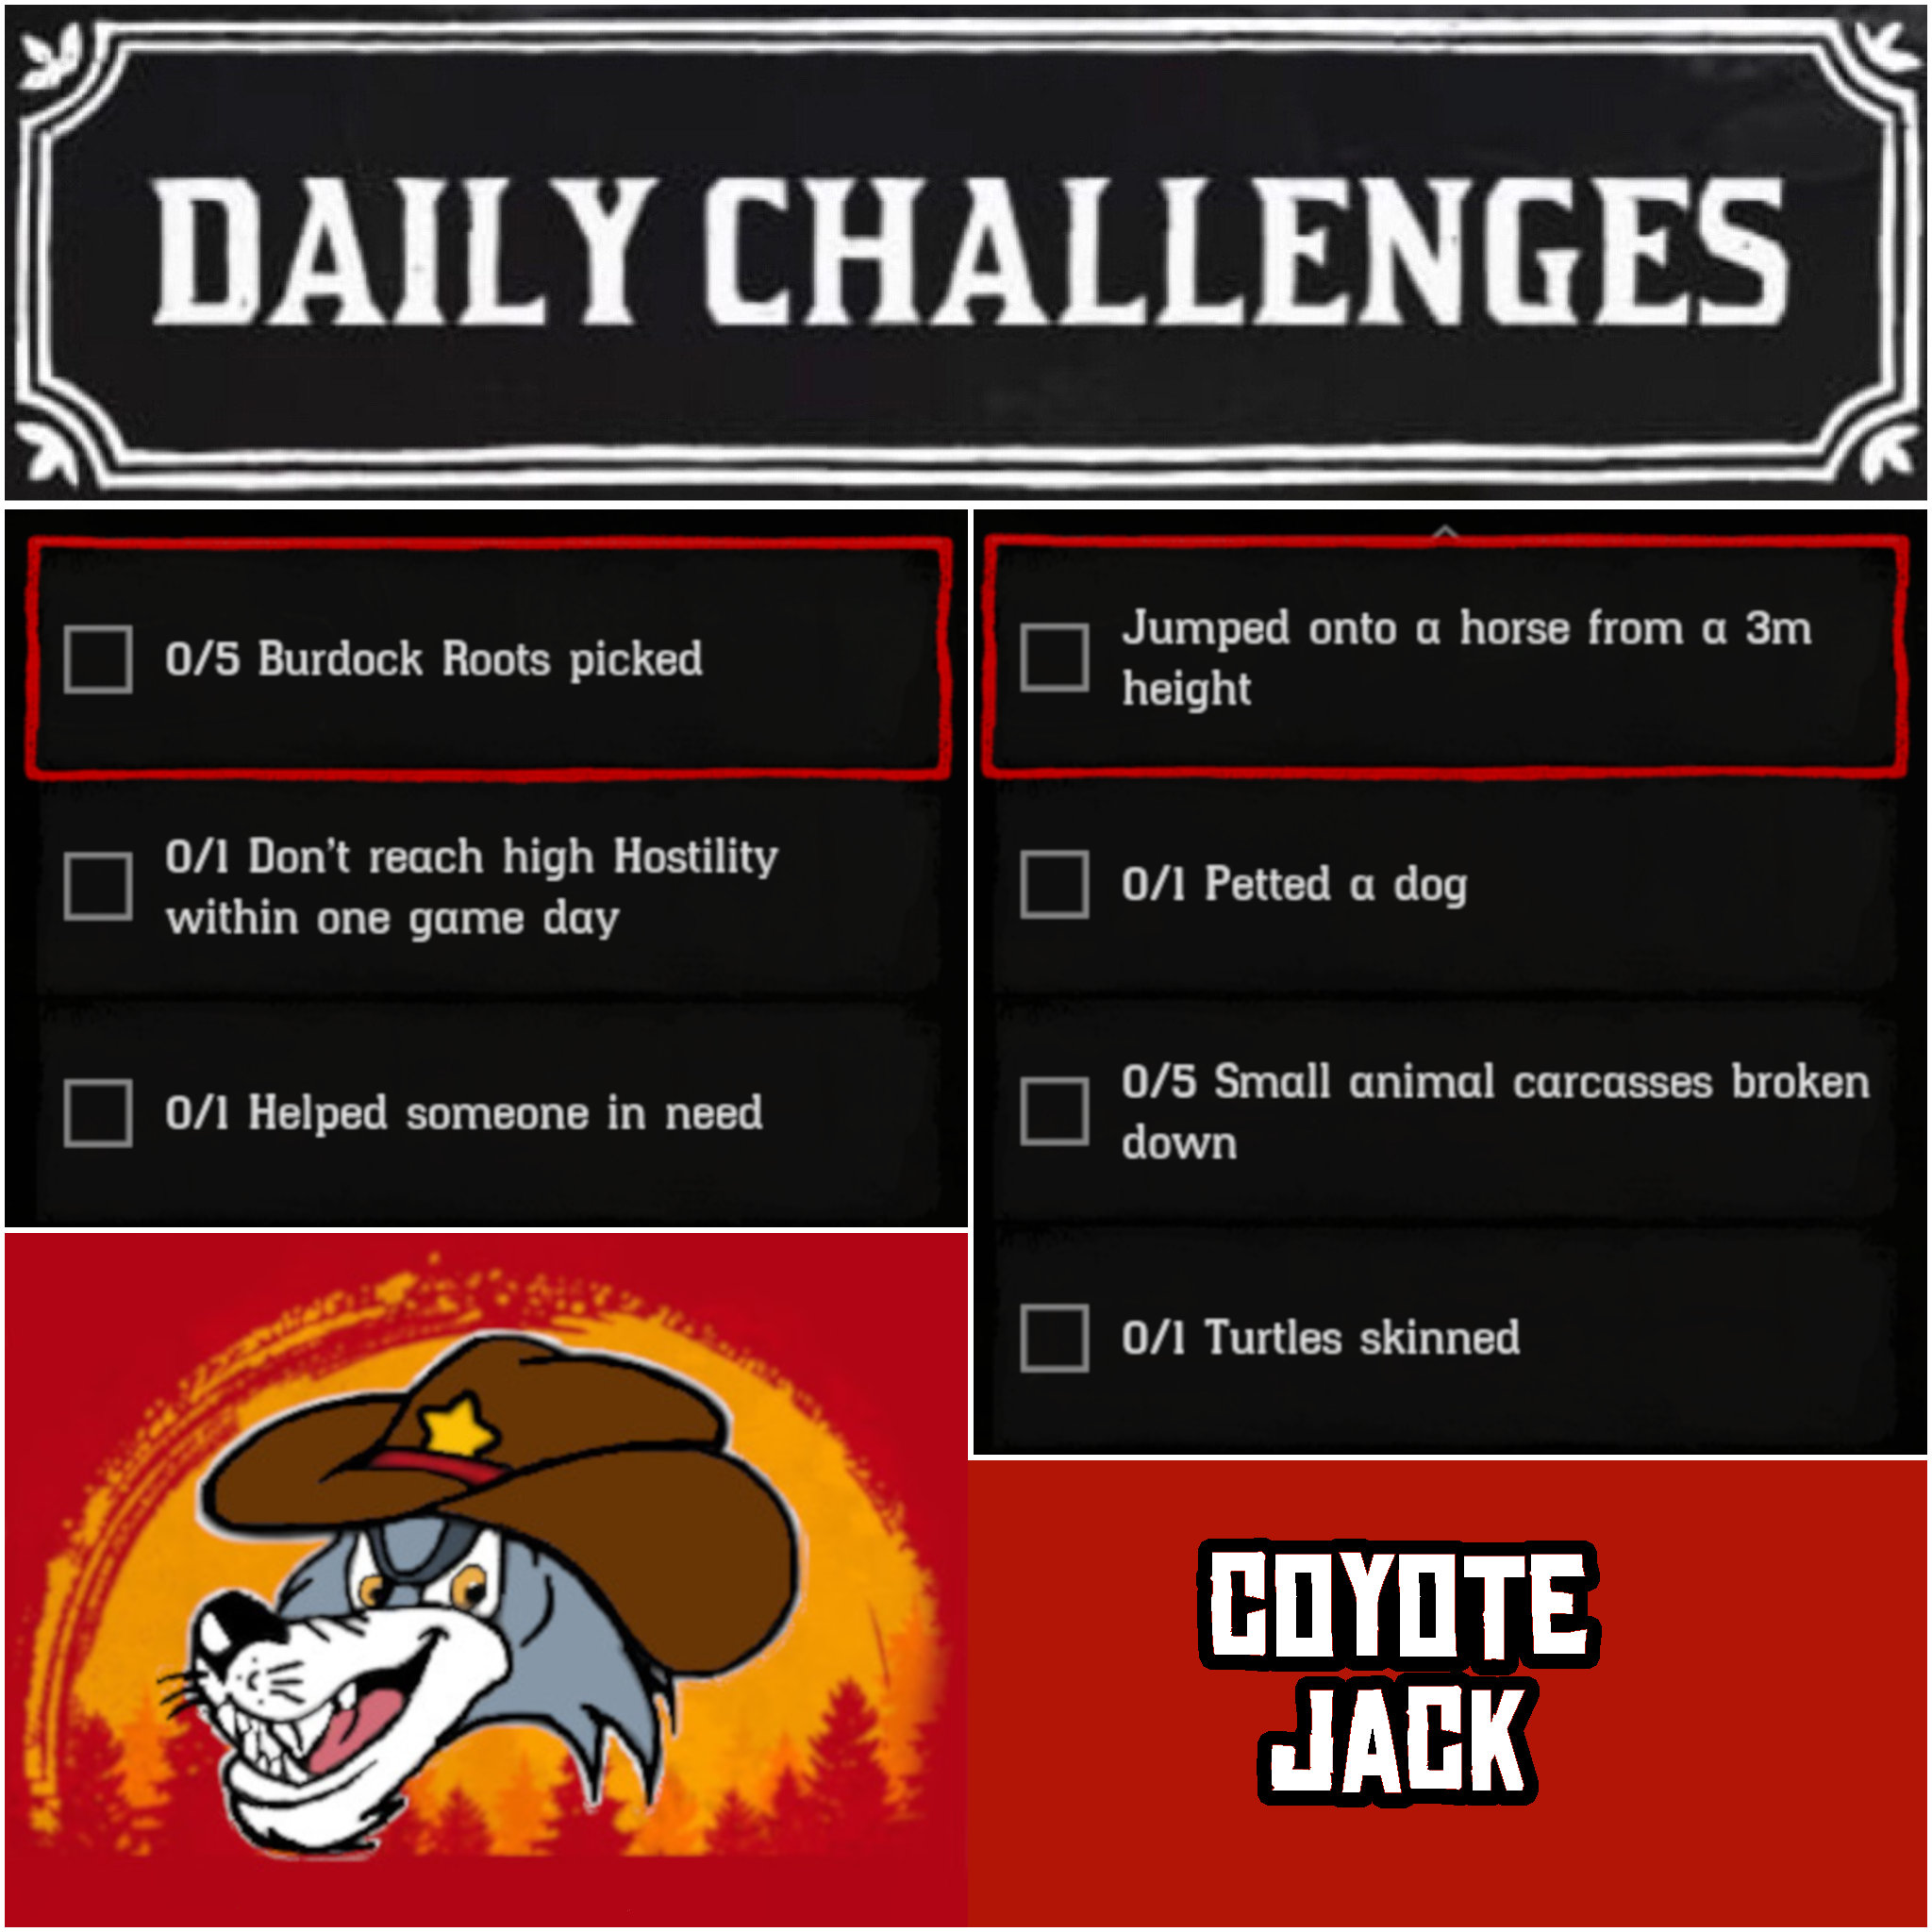 You are currently viewing Wednesday 25 November Daily Challenges